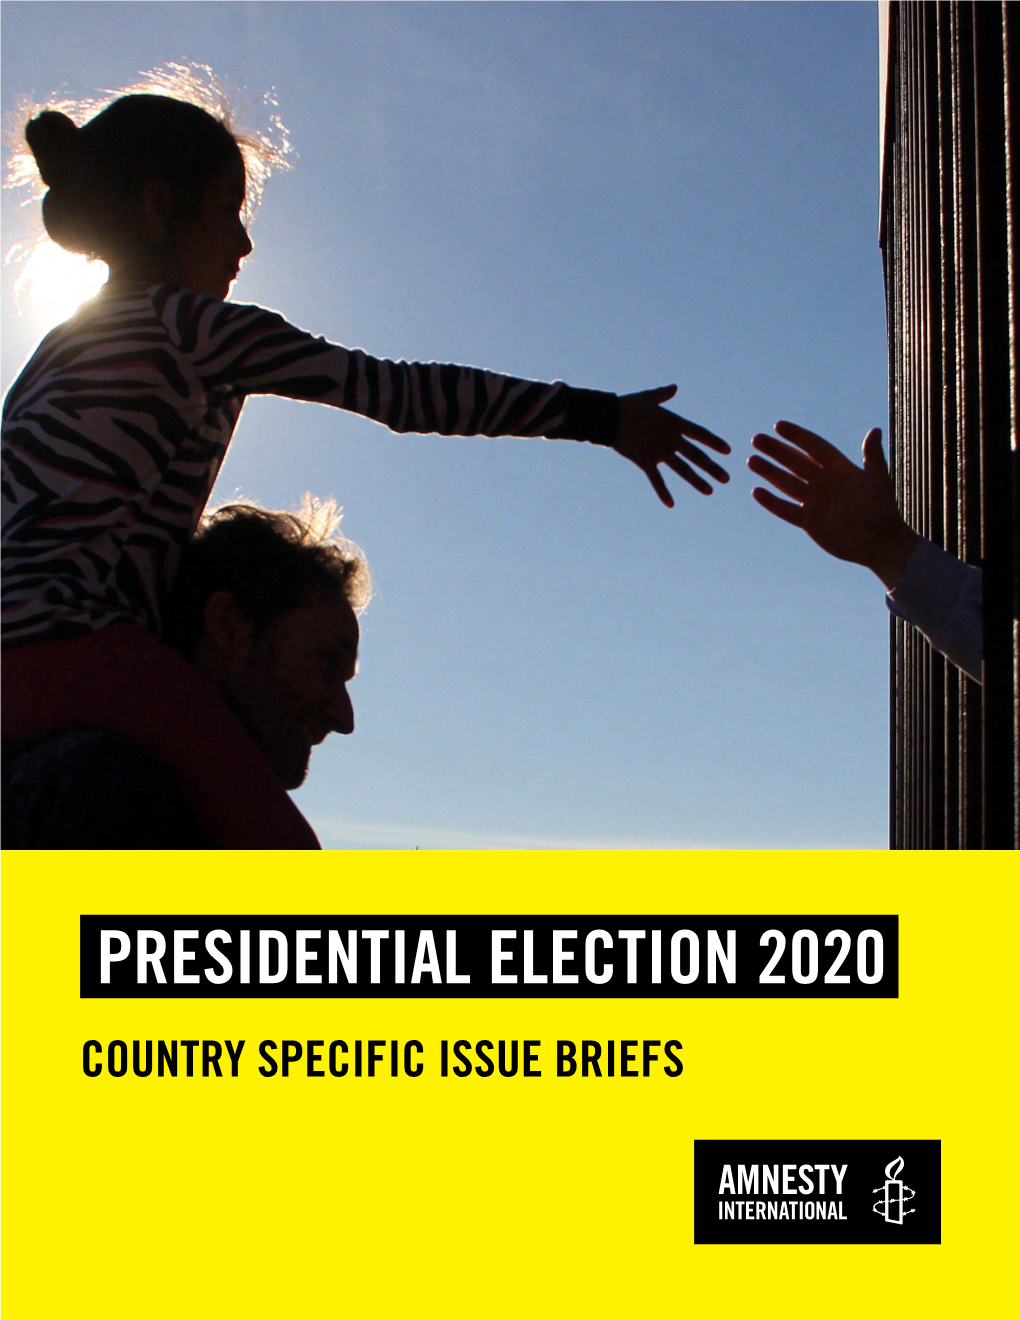 Presidential Election 2020 Country Specific Issue Briefs